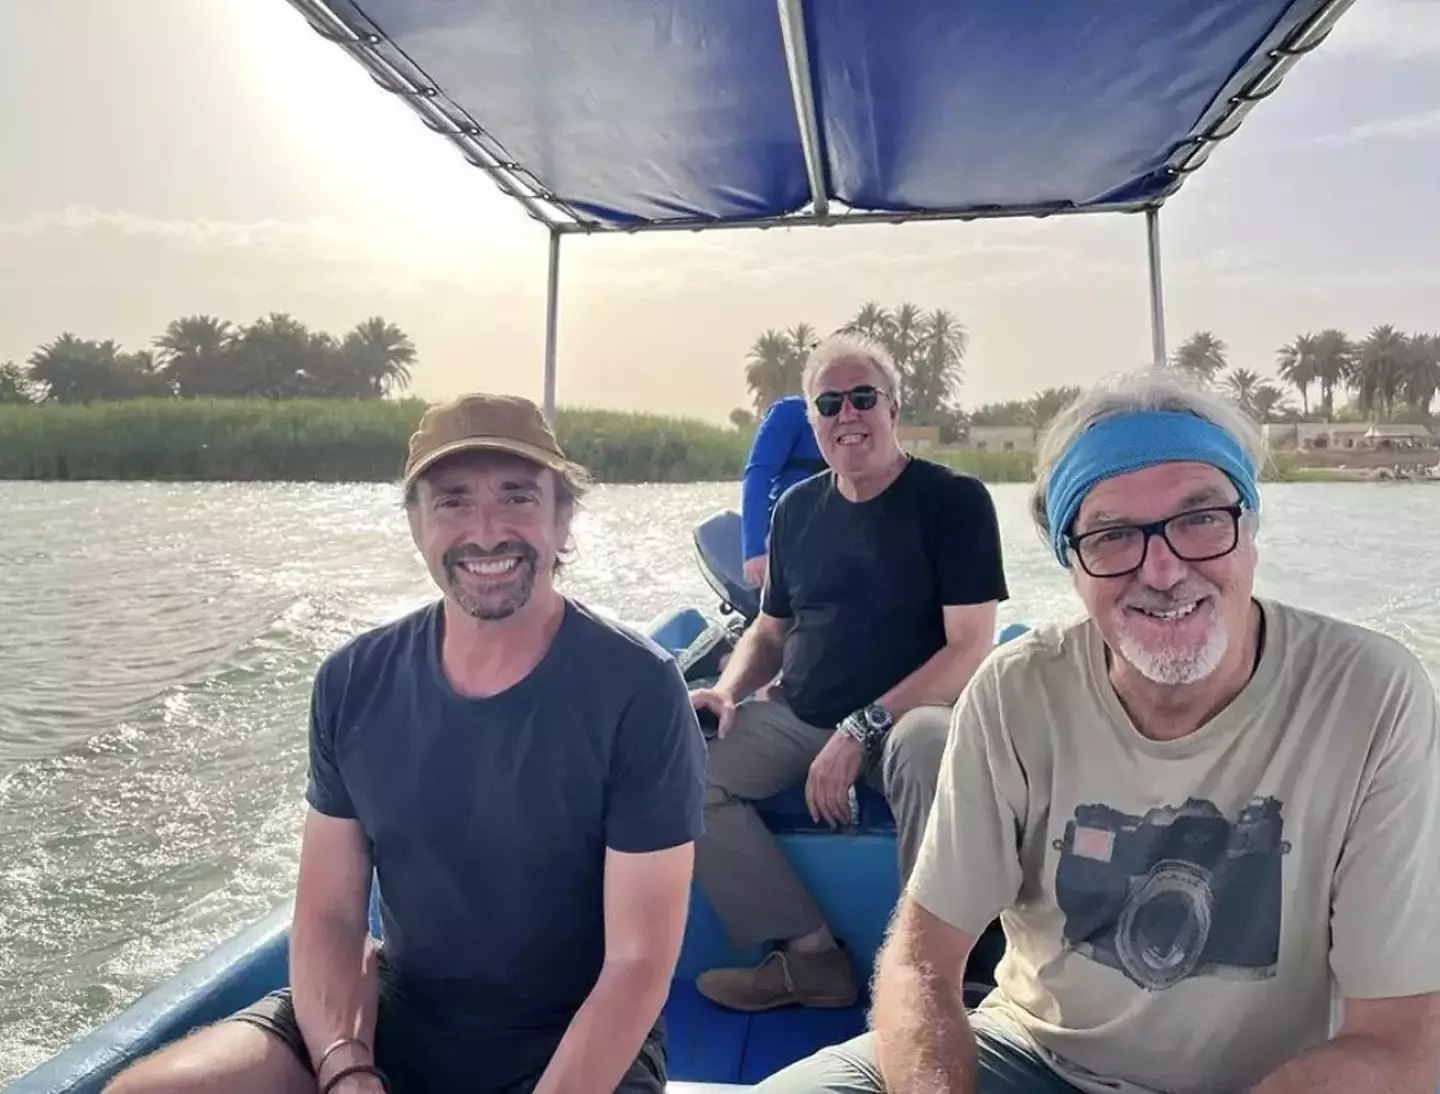 Footage from behind the scenes of The Grand Tour's latest adventure has finally been released.